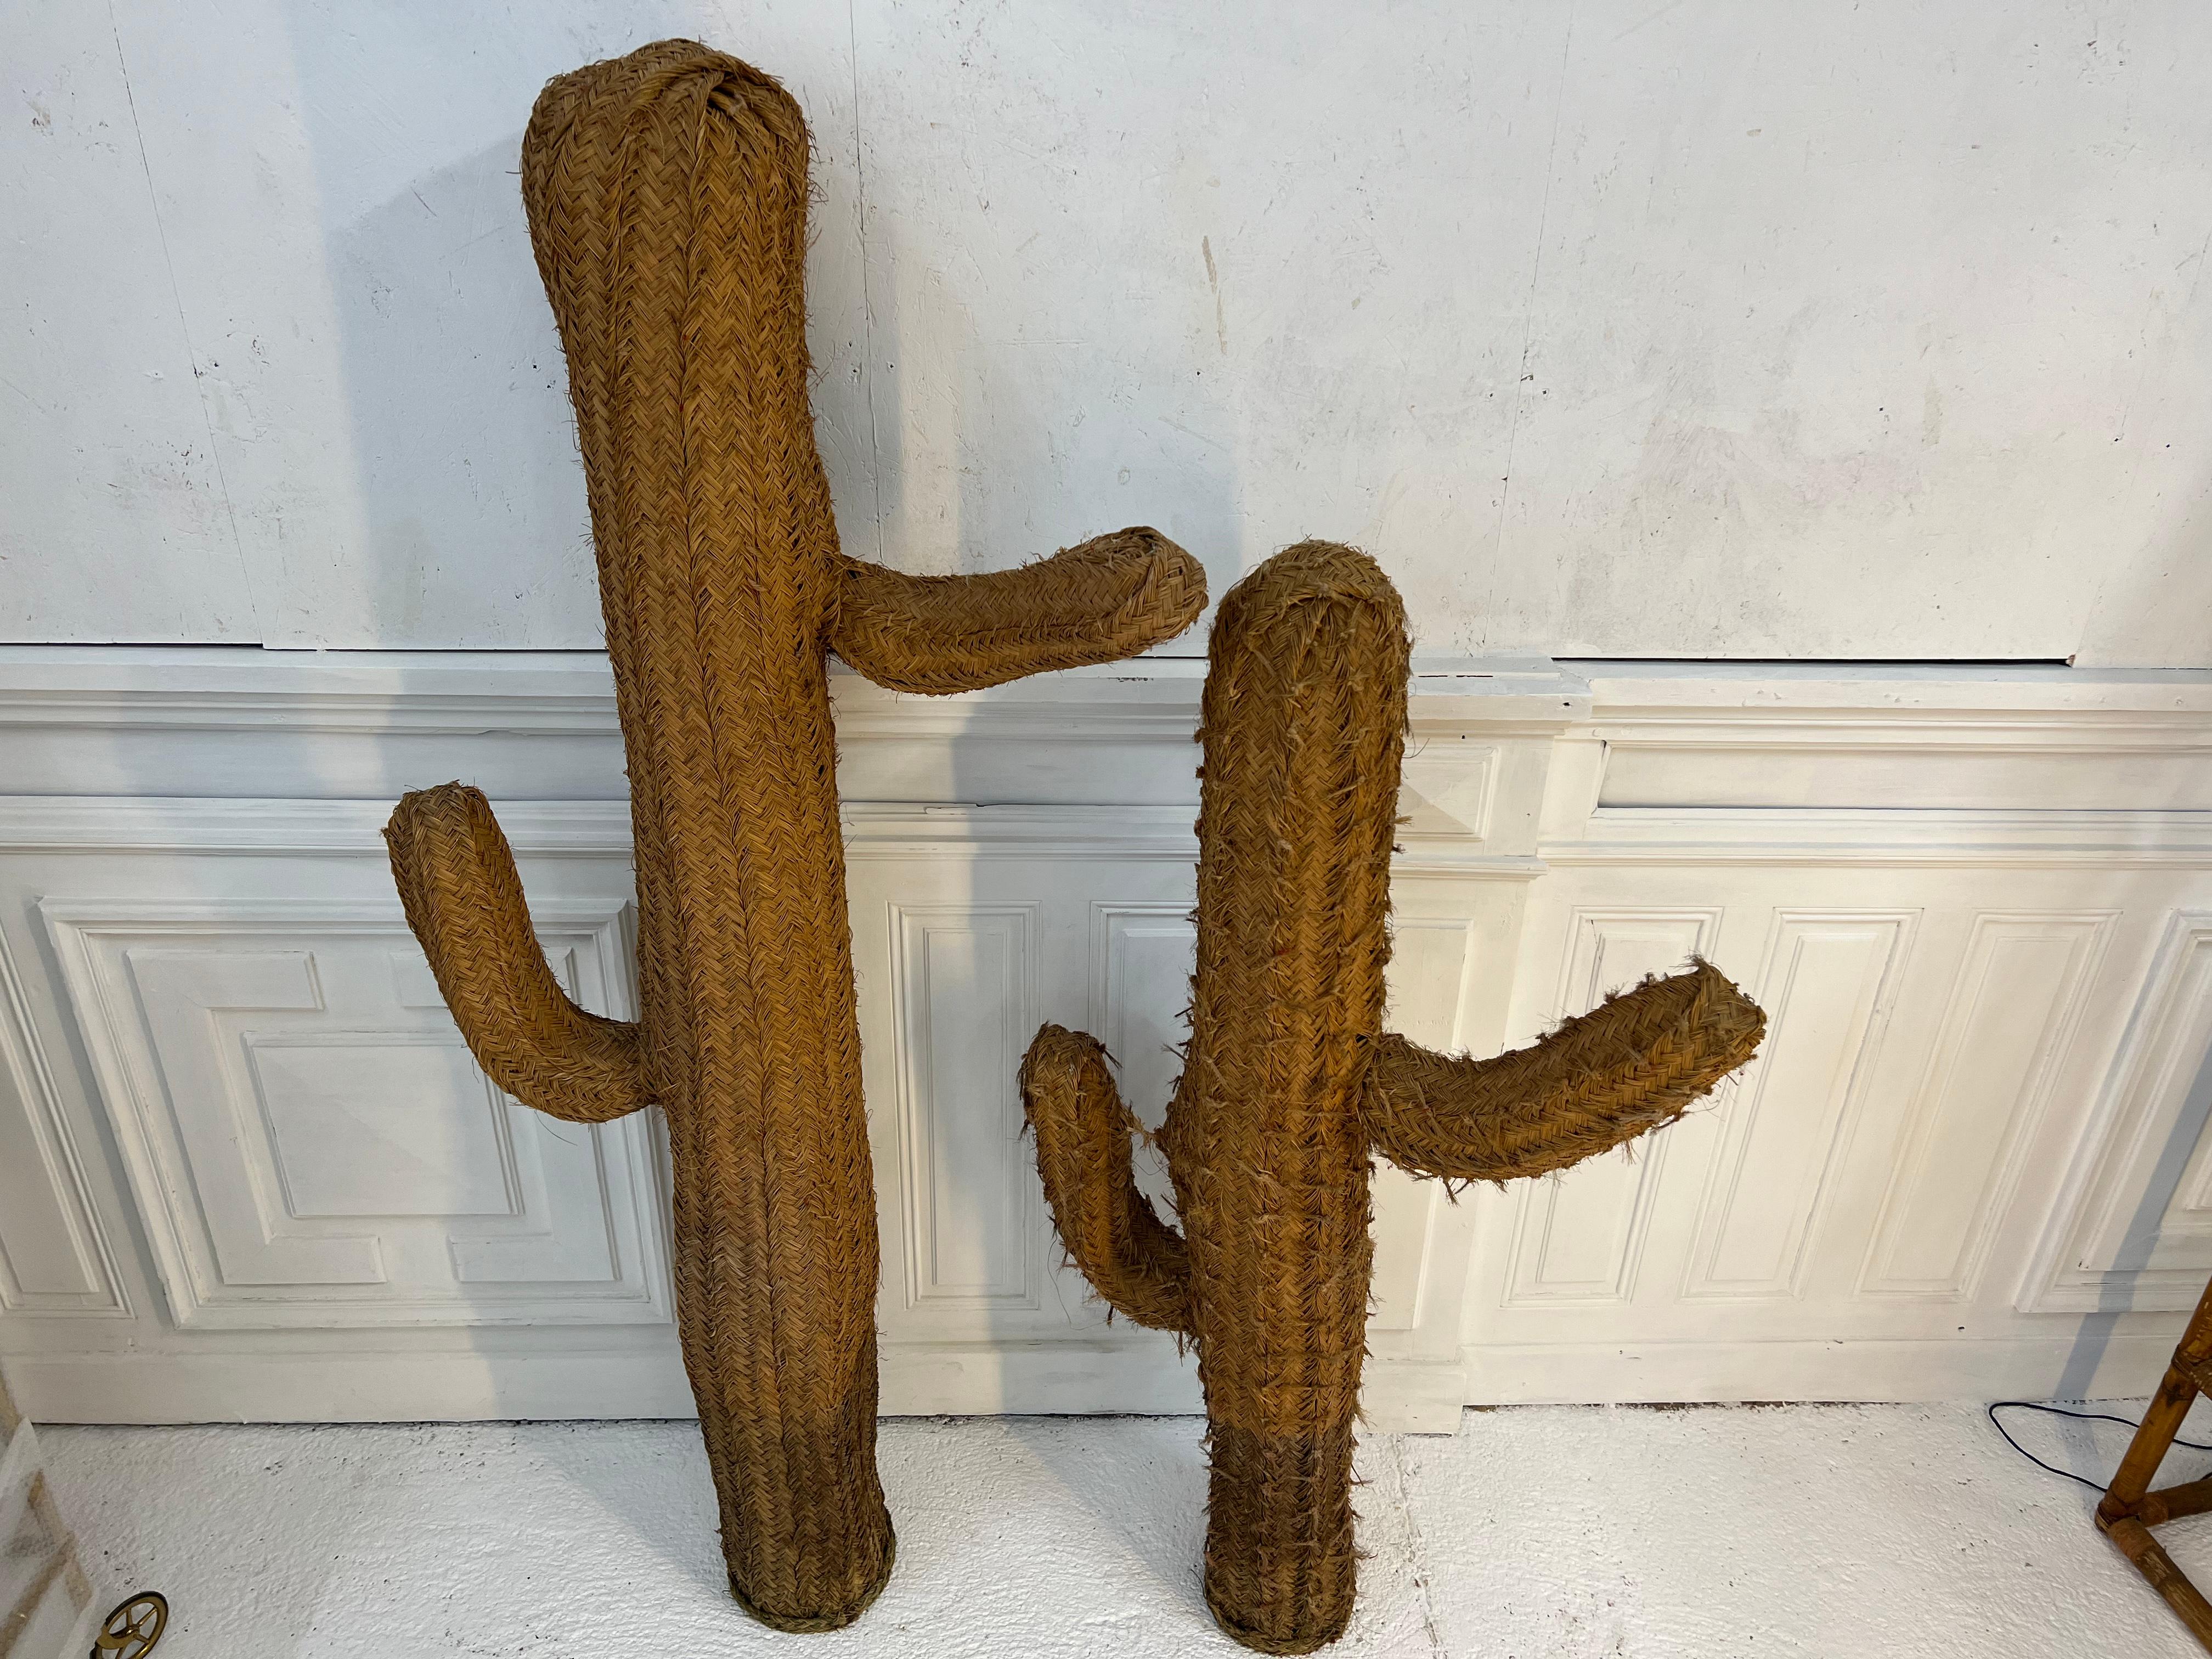 Large 1970s wicker cactus
The tall one measures 180 cm and the small one 150 cm
The set is planned to decorate your interior or exterior gardens.